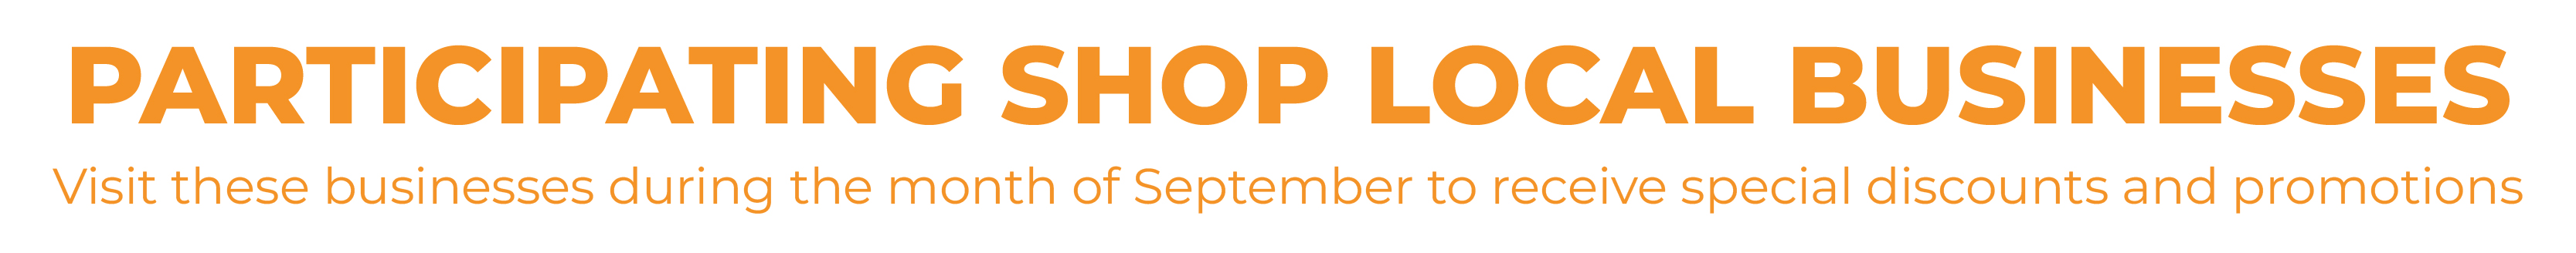 Participating Shop Local Businesses - Visit these businesses during the month of September to receive special discounts and promotions